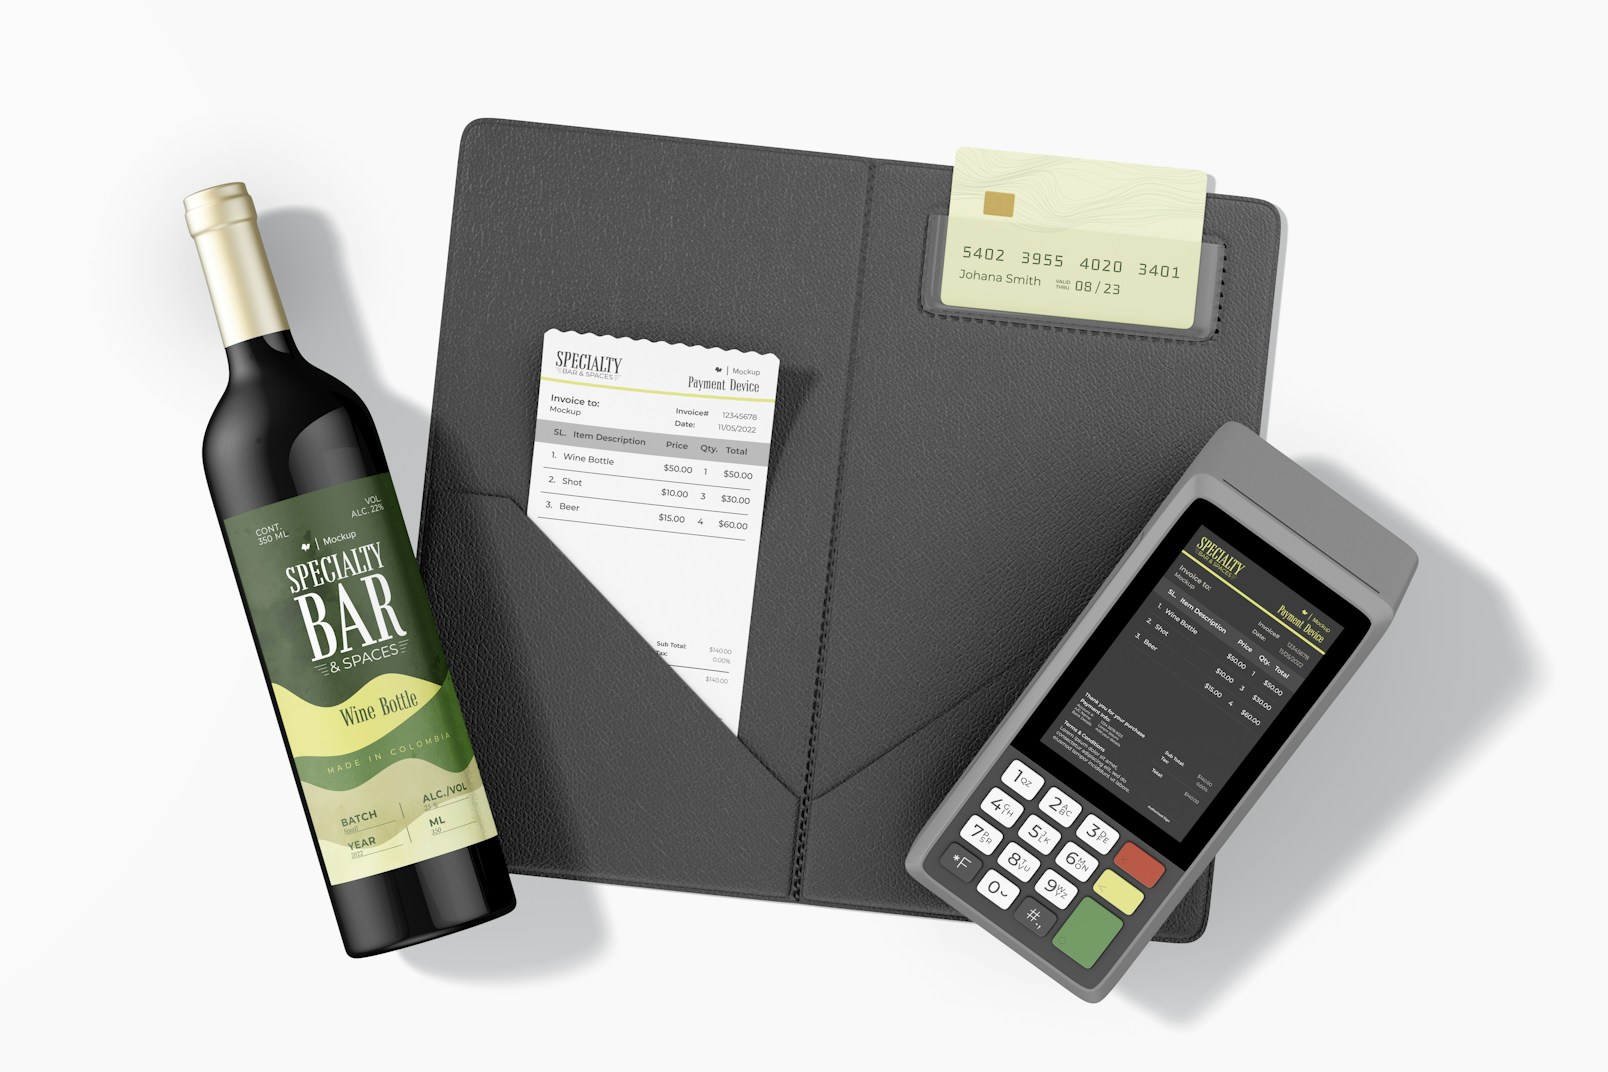 Payment Device on Bar Mockup, with Bottle